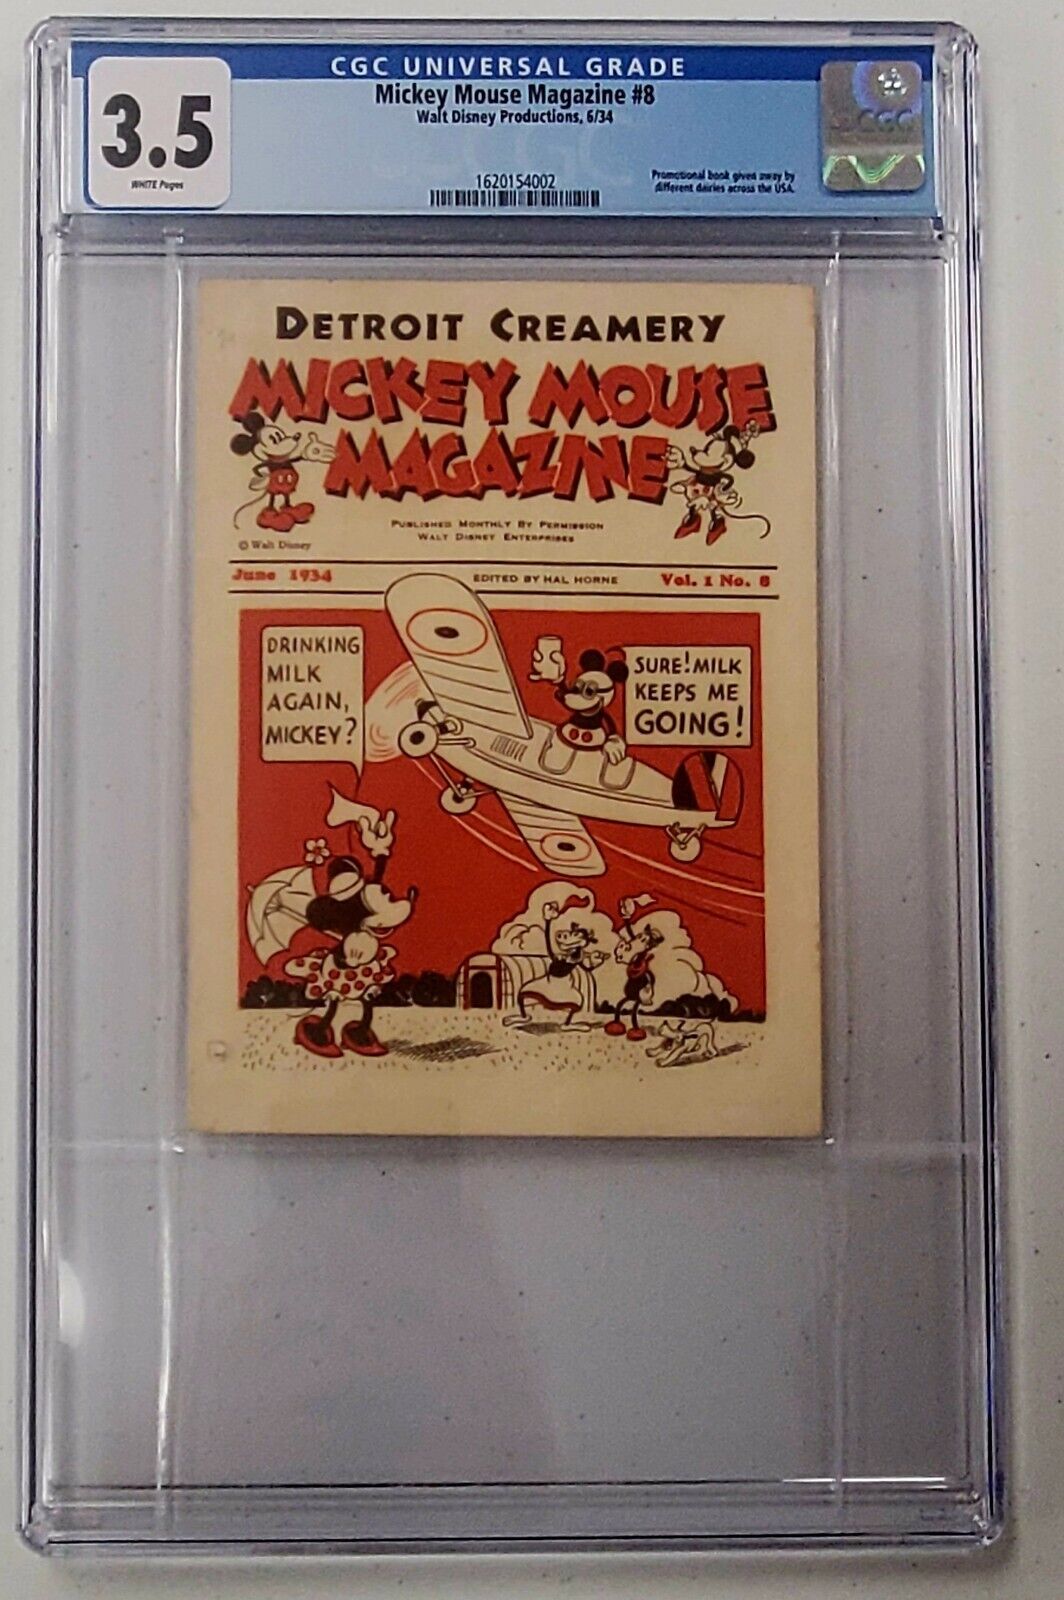 1934 MICKEY MOUSE MAGAZINE VOL 1 NO 8 CGC GRADED DETROIT DAIRY GIVEAWAY 1 RARE 2